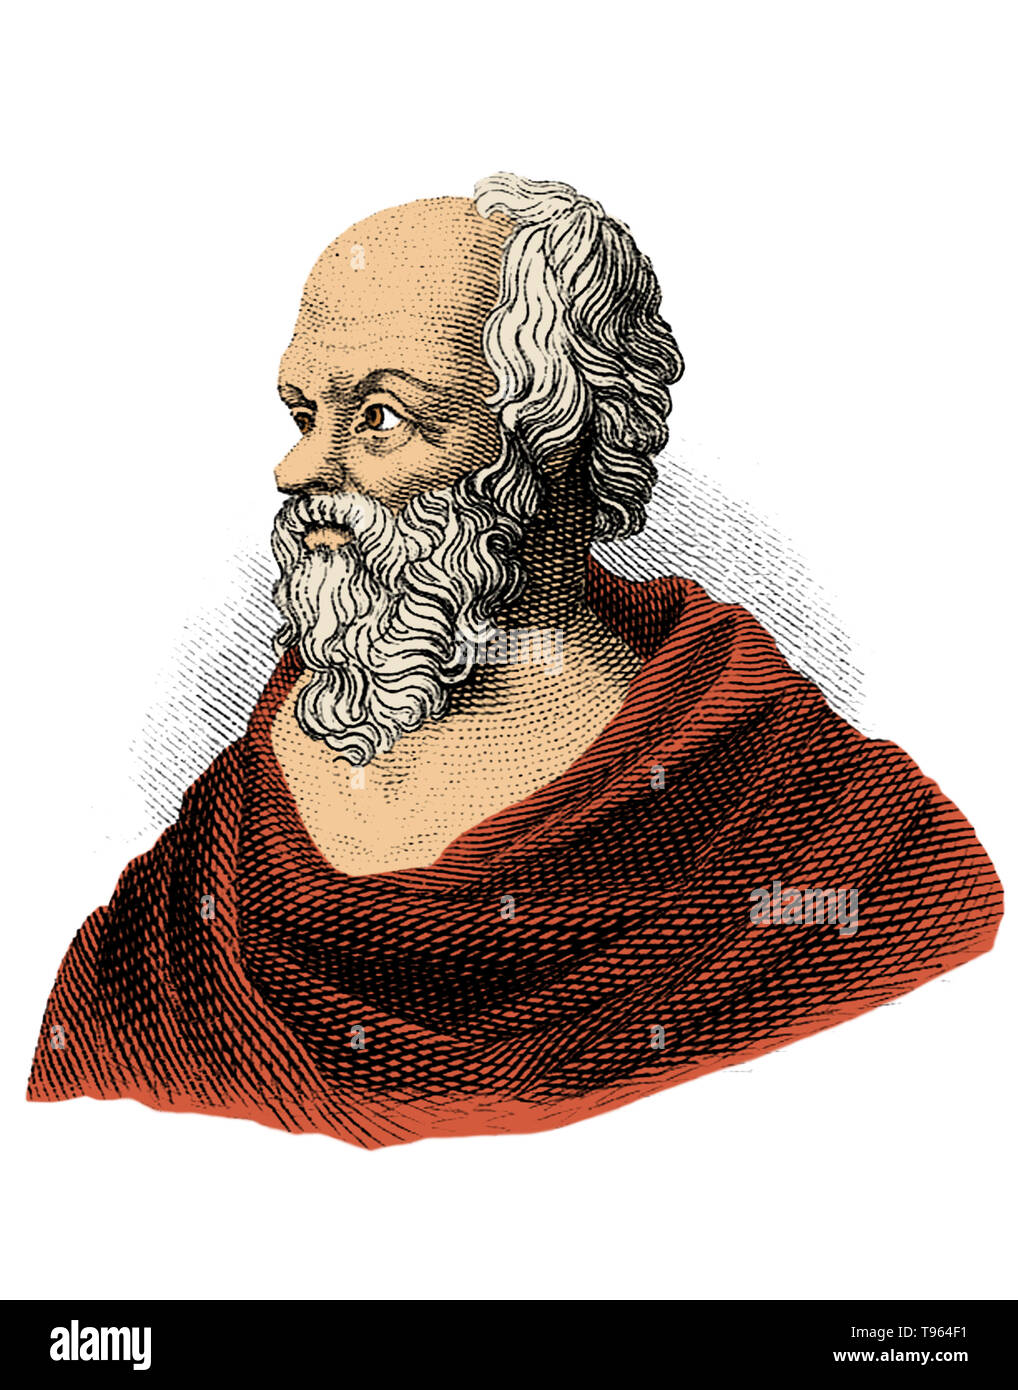 Socrates (469-399 BC) was a classical Greek Athenian philosopher. Credited as one of the founders of Western philosophy, he is known chiefly through the accounts of later classical writers, especially the writings of his students Plato and Xenophon, and the plays of his contemporary Aristophanes. Stock Photo